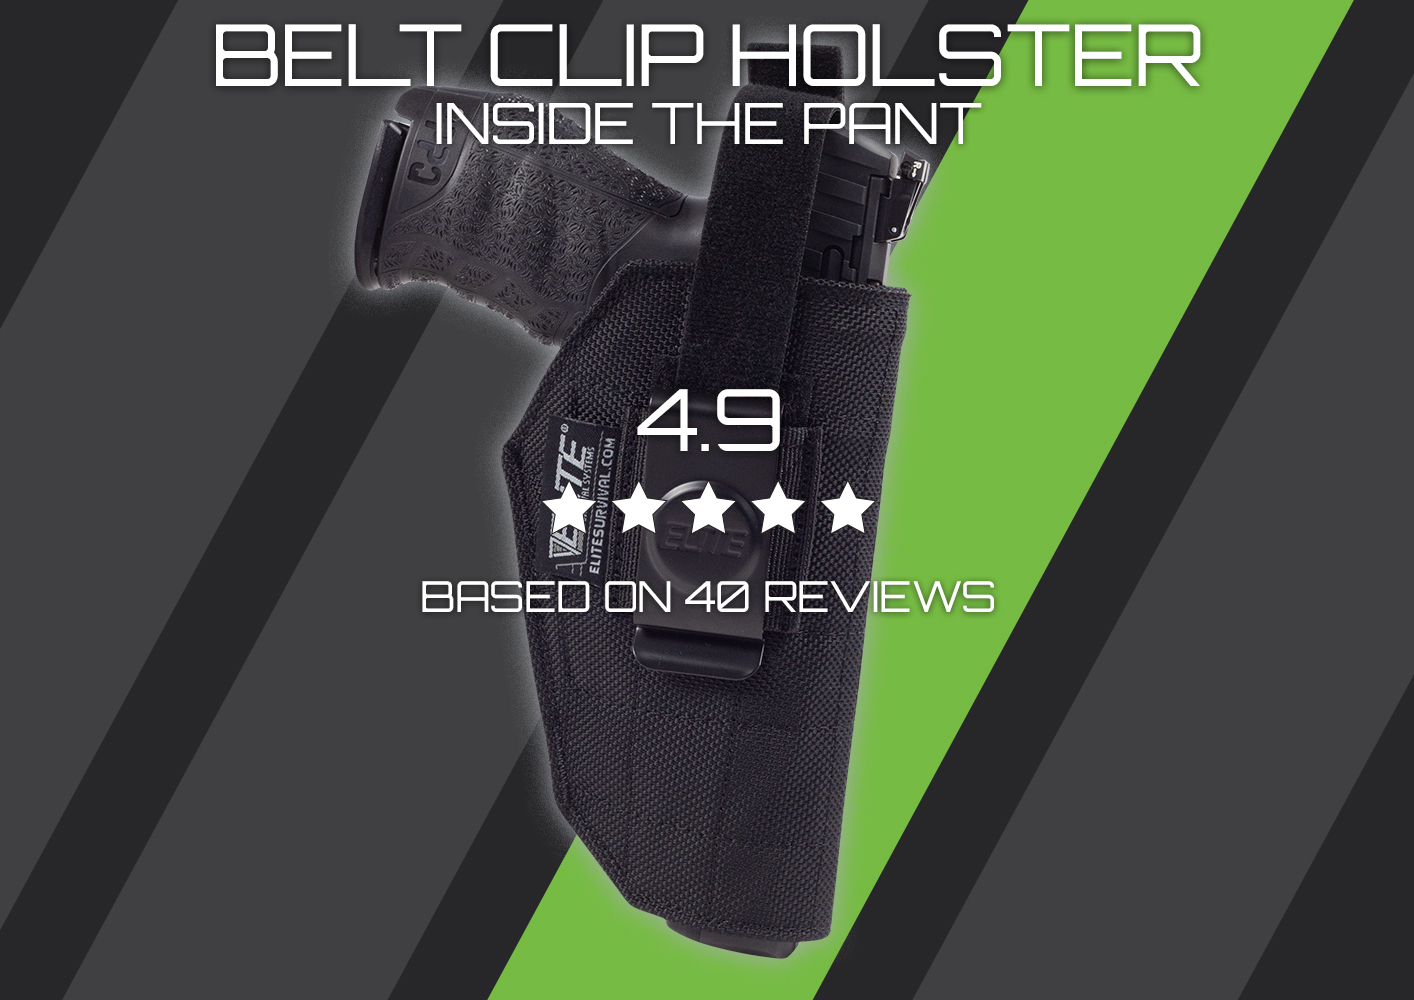 Elite Survival Inside the Pant Clip Holster - Concealed Carry Holster for Compact Handguns. Comfortable and Durable. Buy Now for Secure Carry!